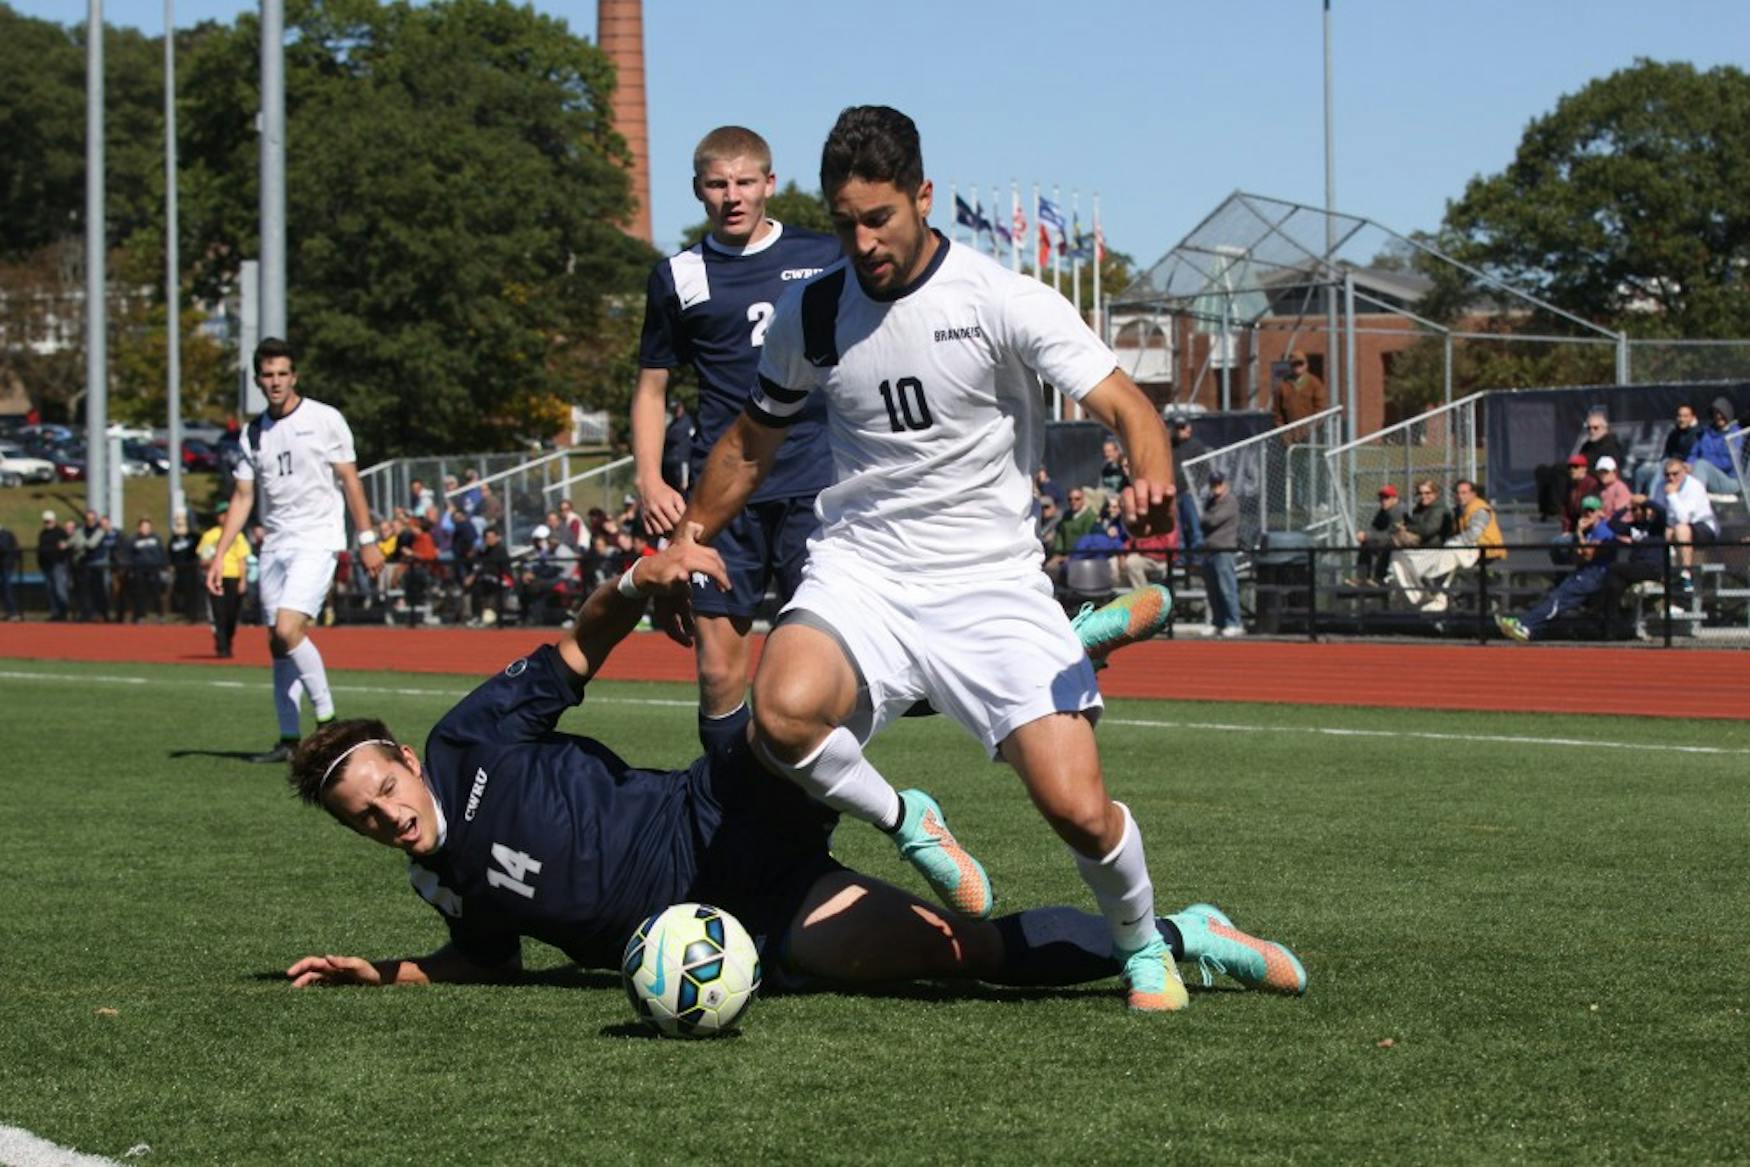 FANCY FOOTWORK: Midfielder Michael Soboff '15 (right) dribbles through a Case Western Reserve University defender on Sunday.